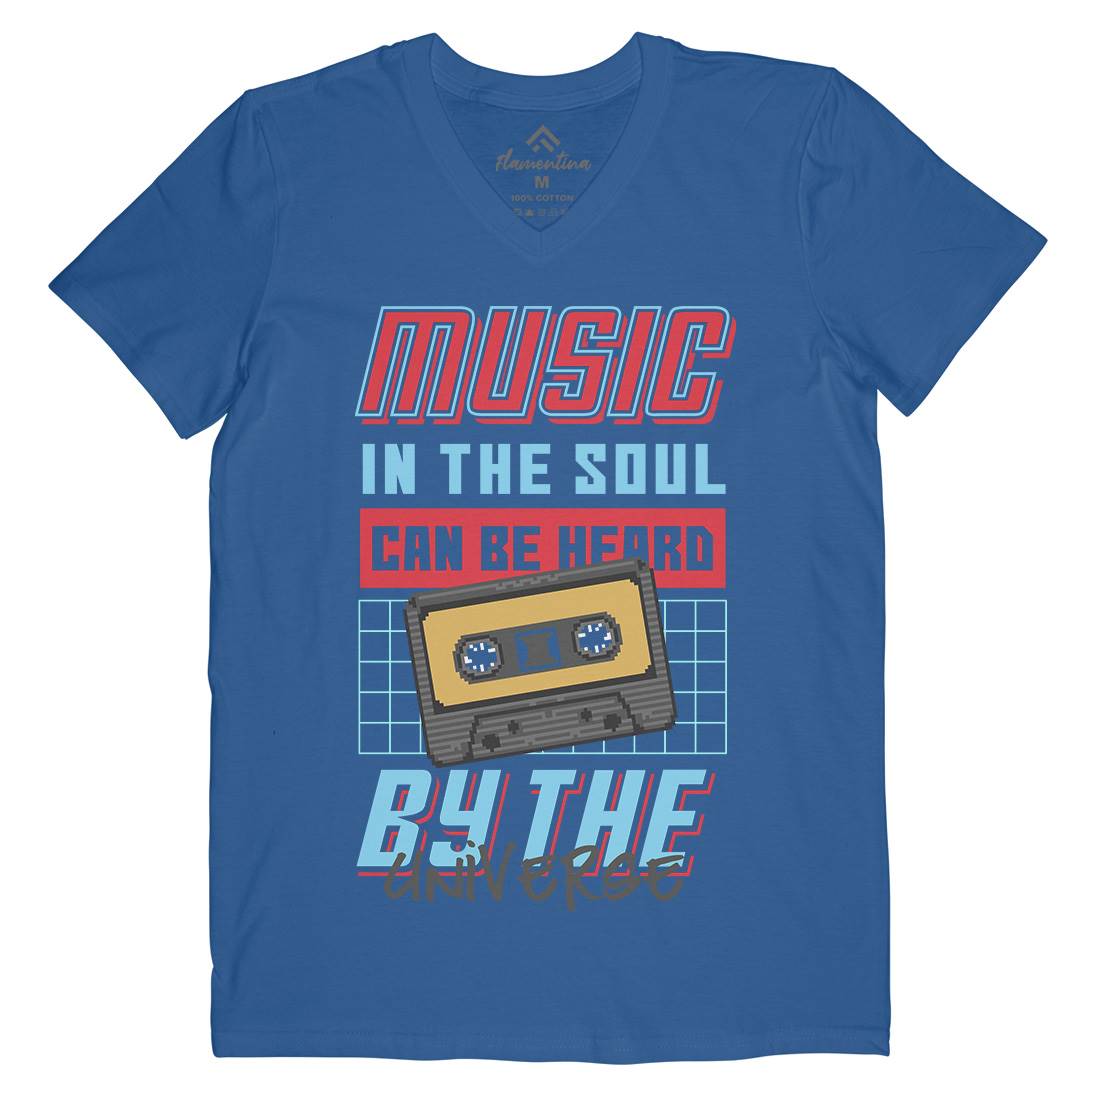 In The Soul Can Be Heard By The Universe Mens V-Neck T-Shirt Music B935